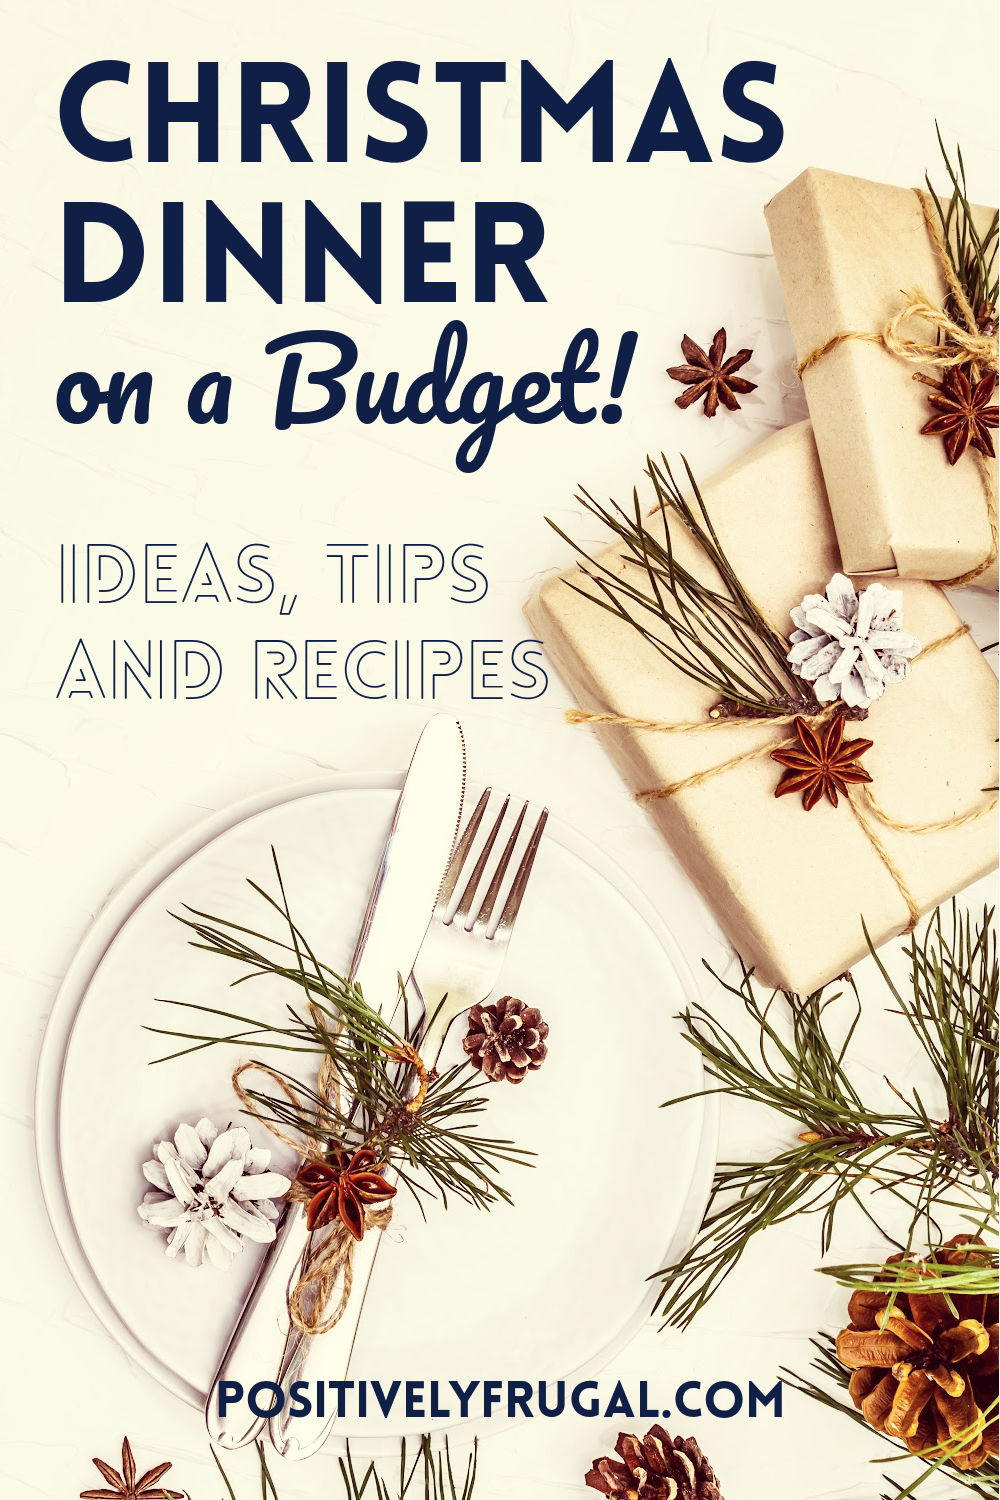 Christmas Dinner on a Budget Ideas Tips Recipes by PositivelyFrugal.com